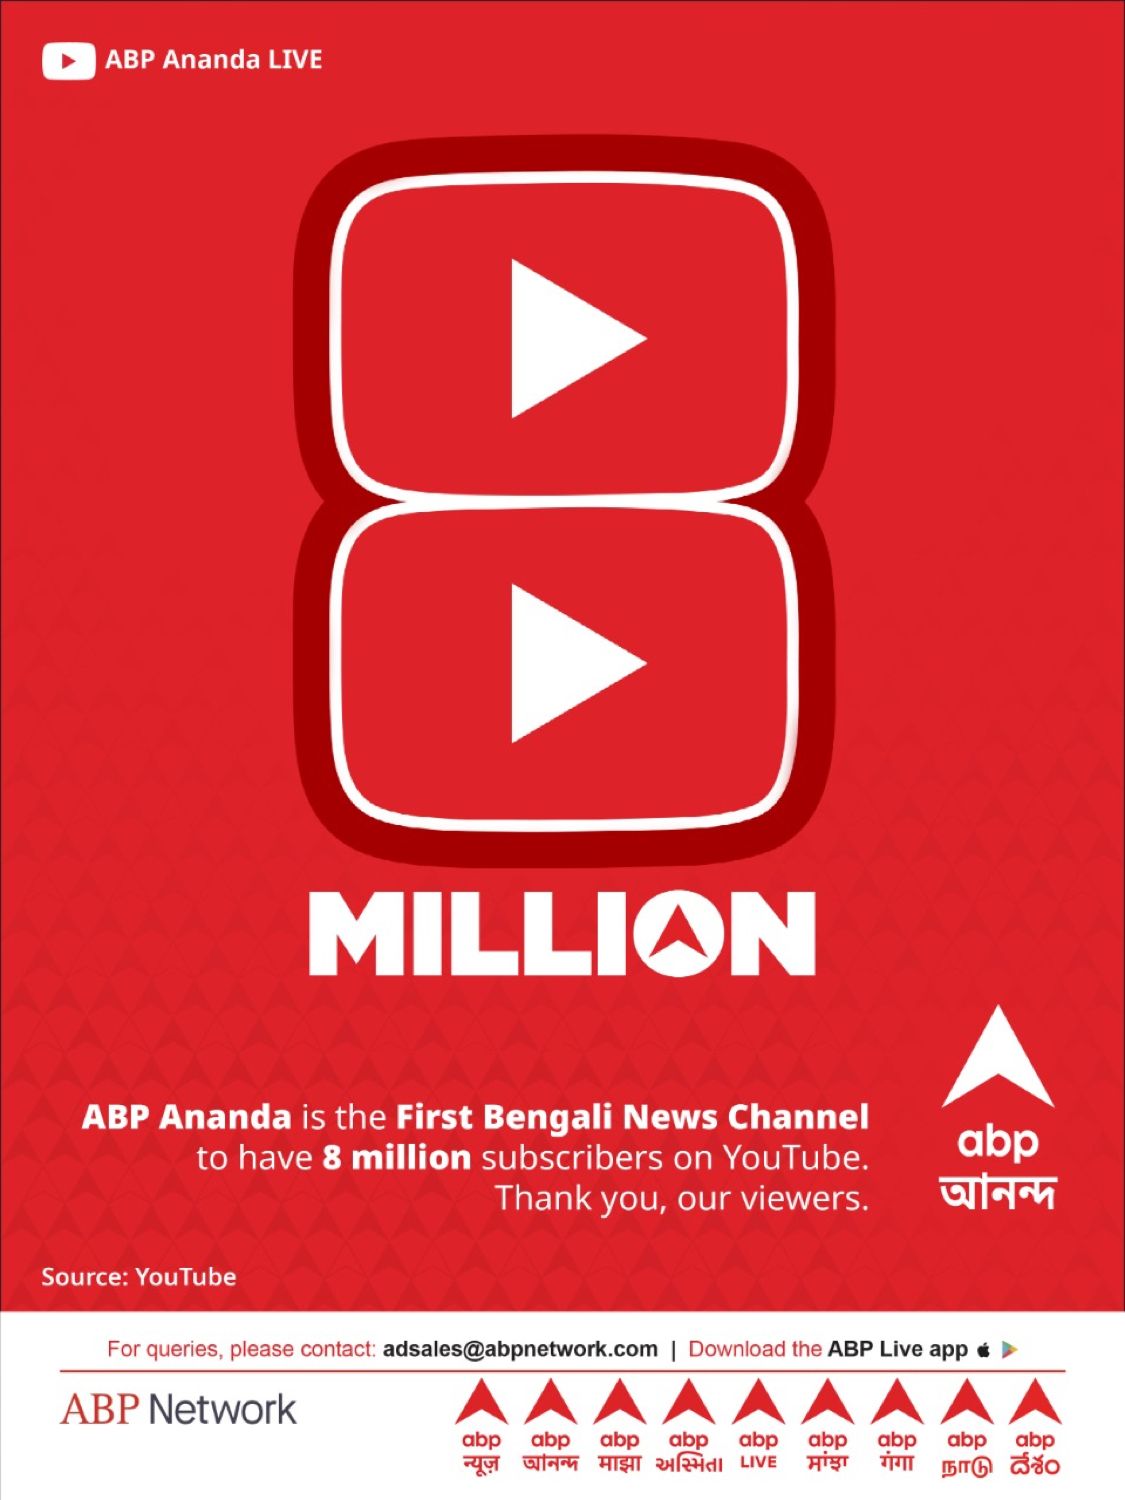 ABP Ananda hits a record 8mn views on YouTube, becomes the first Bengali news channel to achieve this mileston